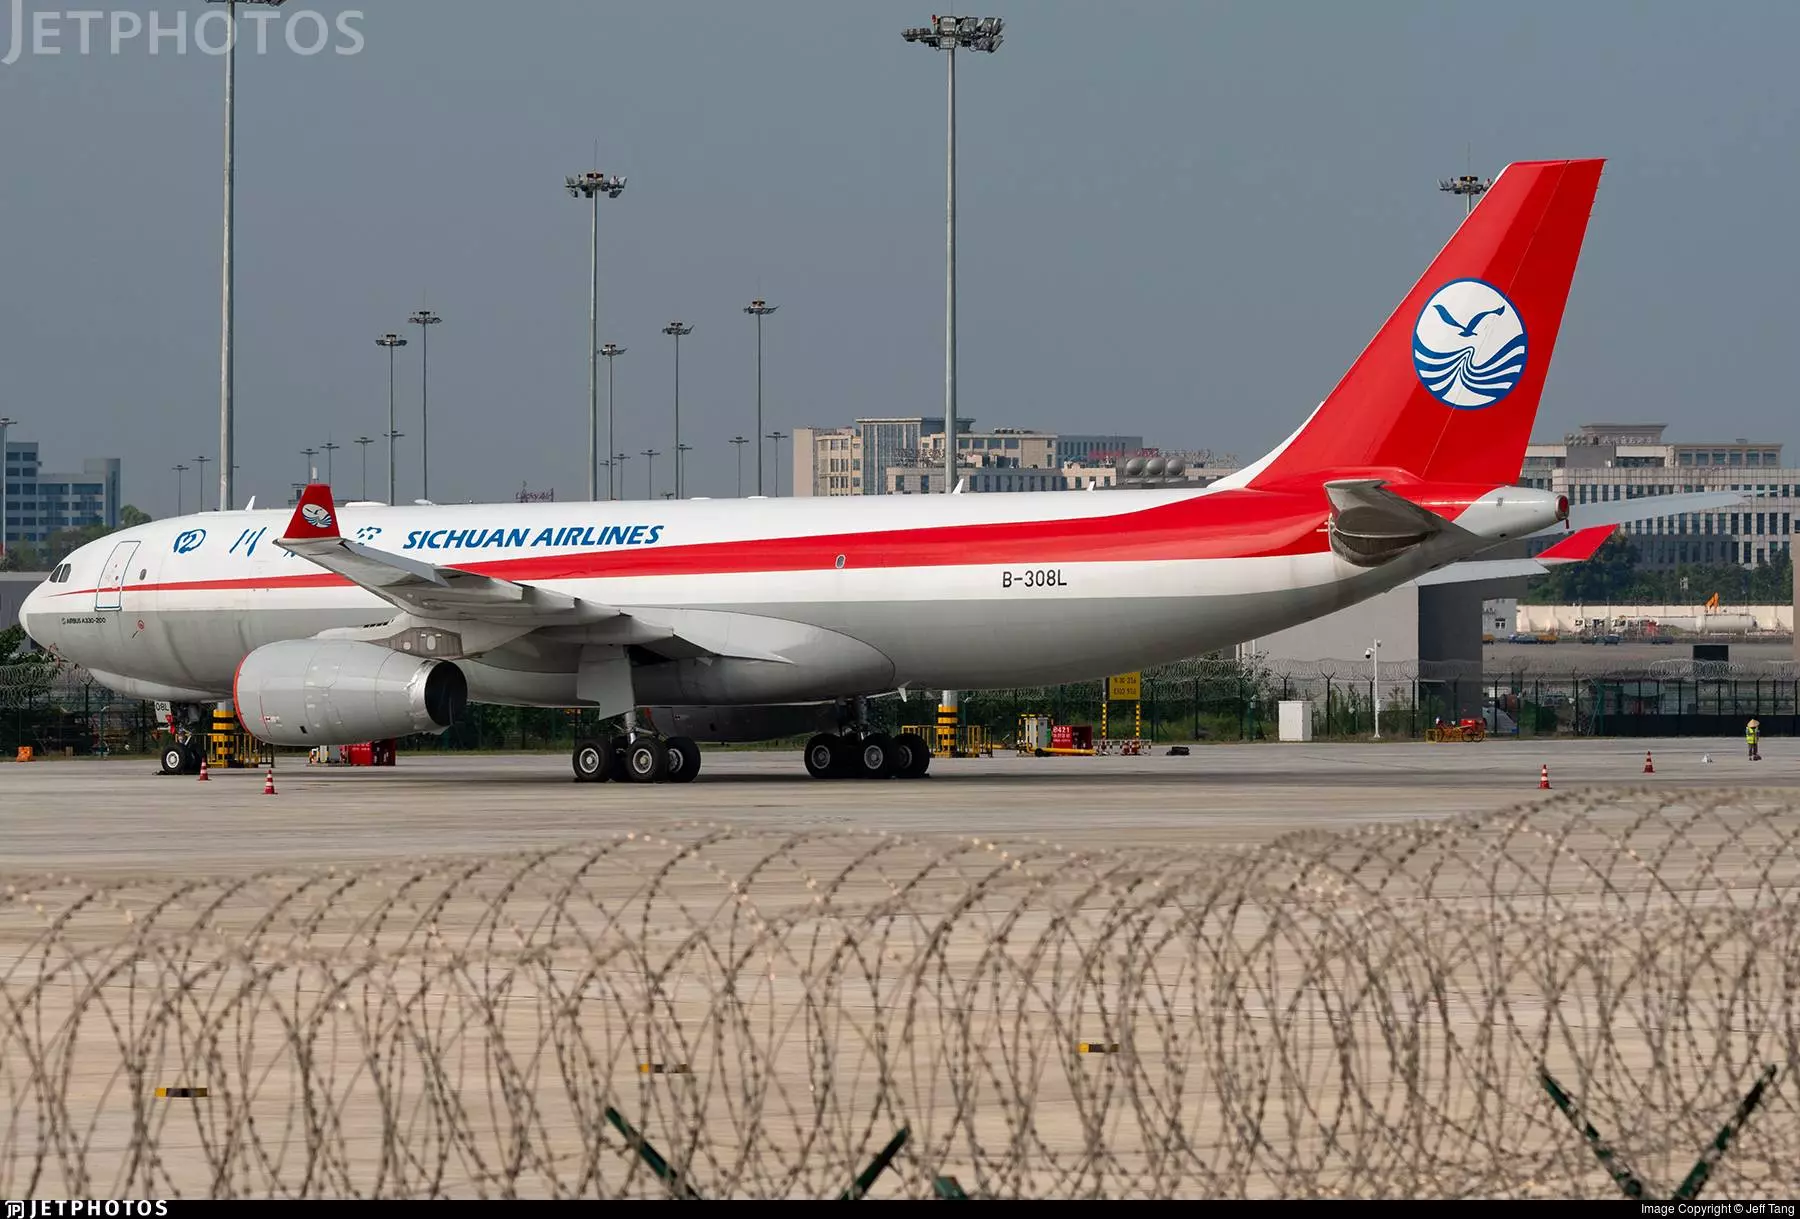 Sichuan airlines - sichuan airlines